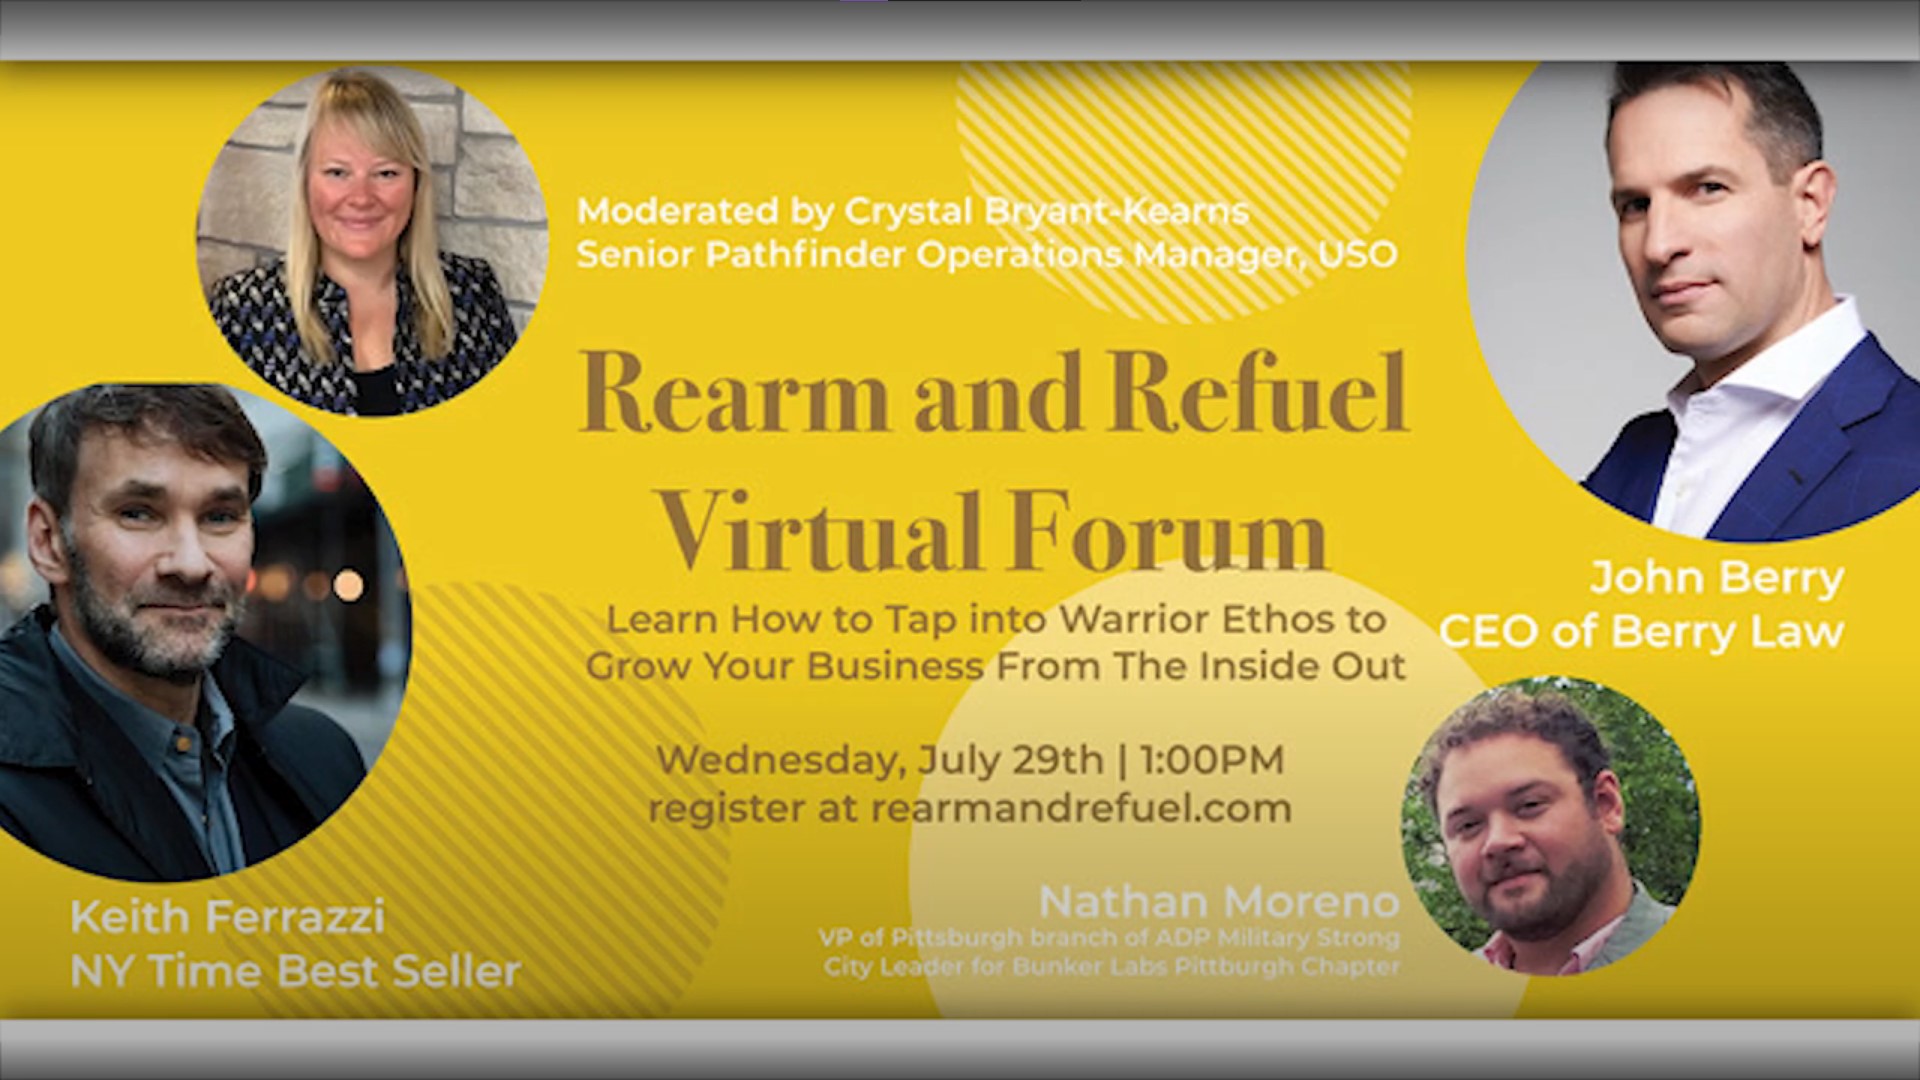 Rearm & Refuel Forum: Learn How to Tap into Warrior Ethos to Grow Your Business From The Inside Out